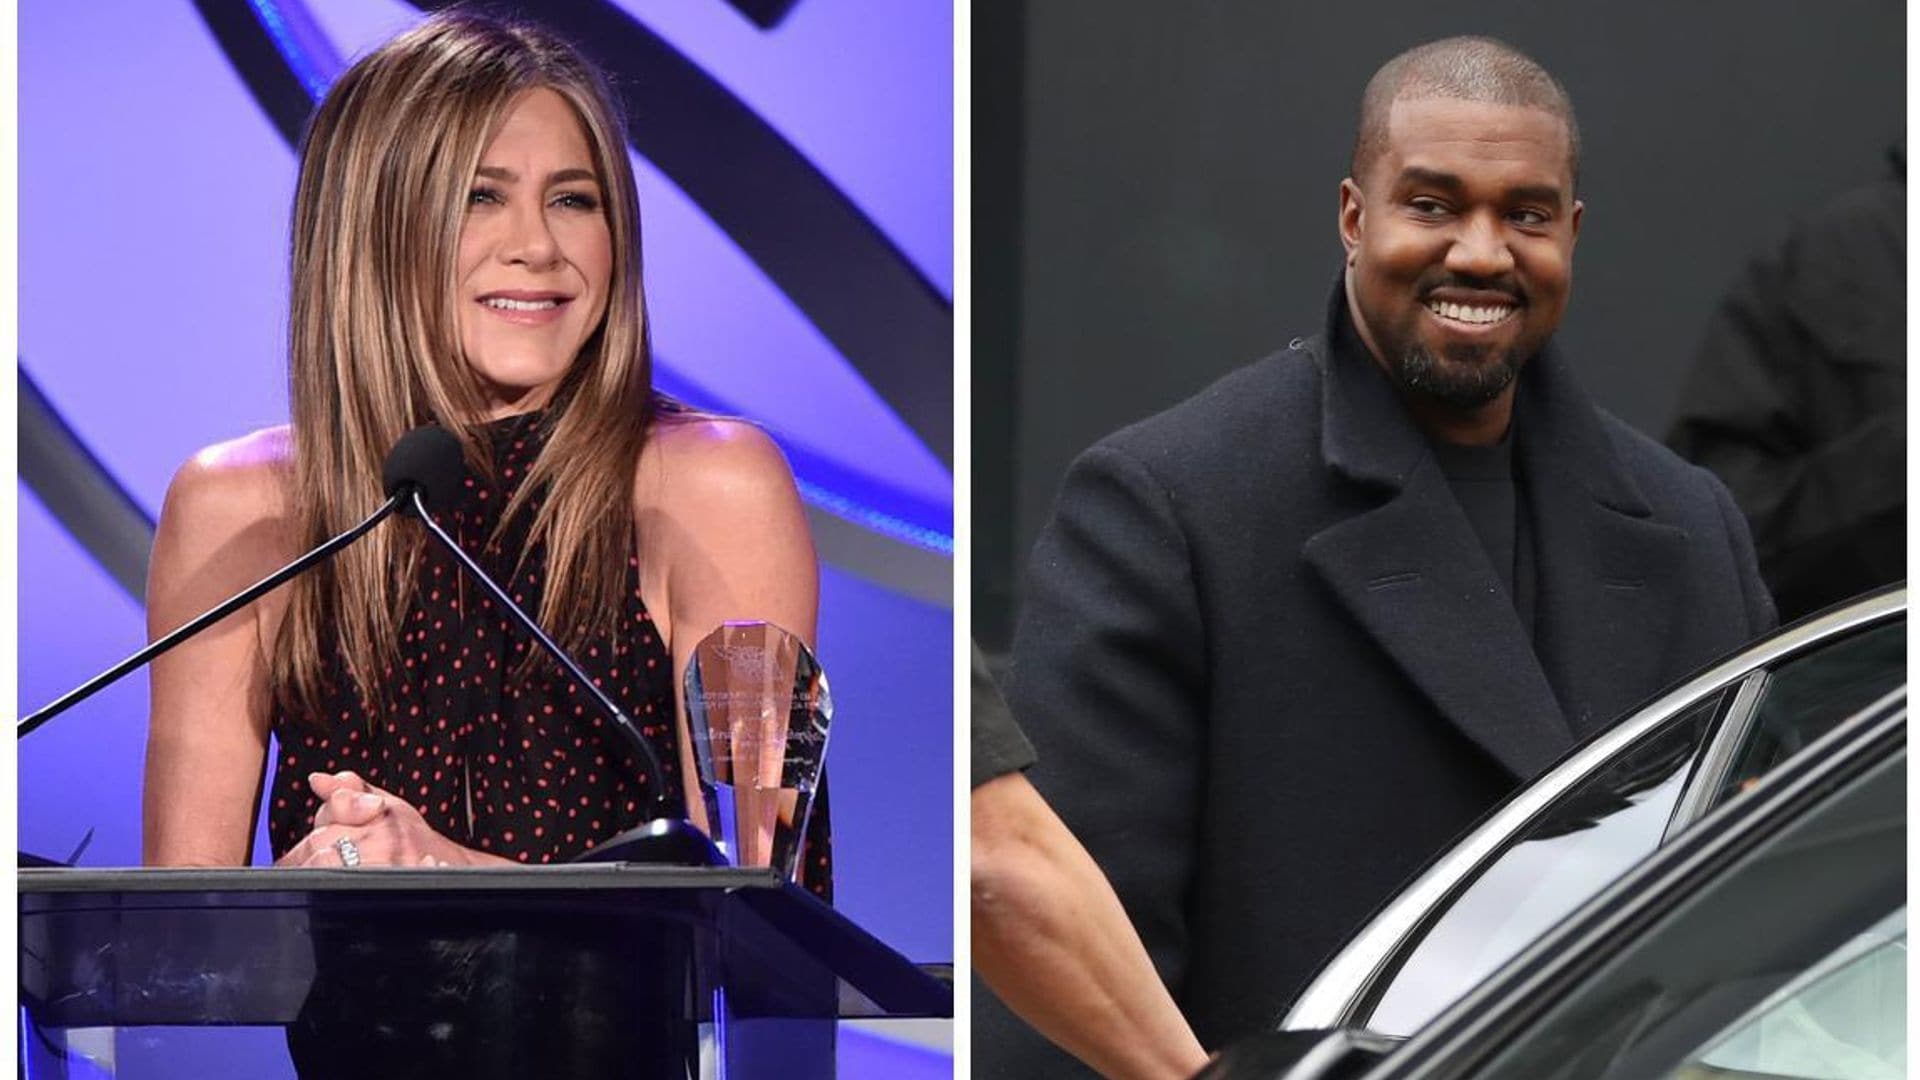 Kanye West responds back to Jennifer Aniston and announces he’s building a futuristic city